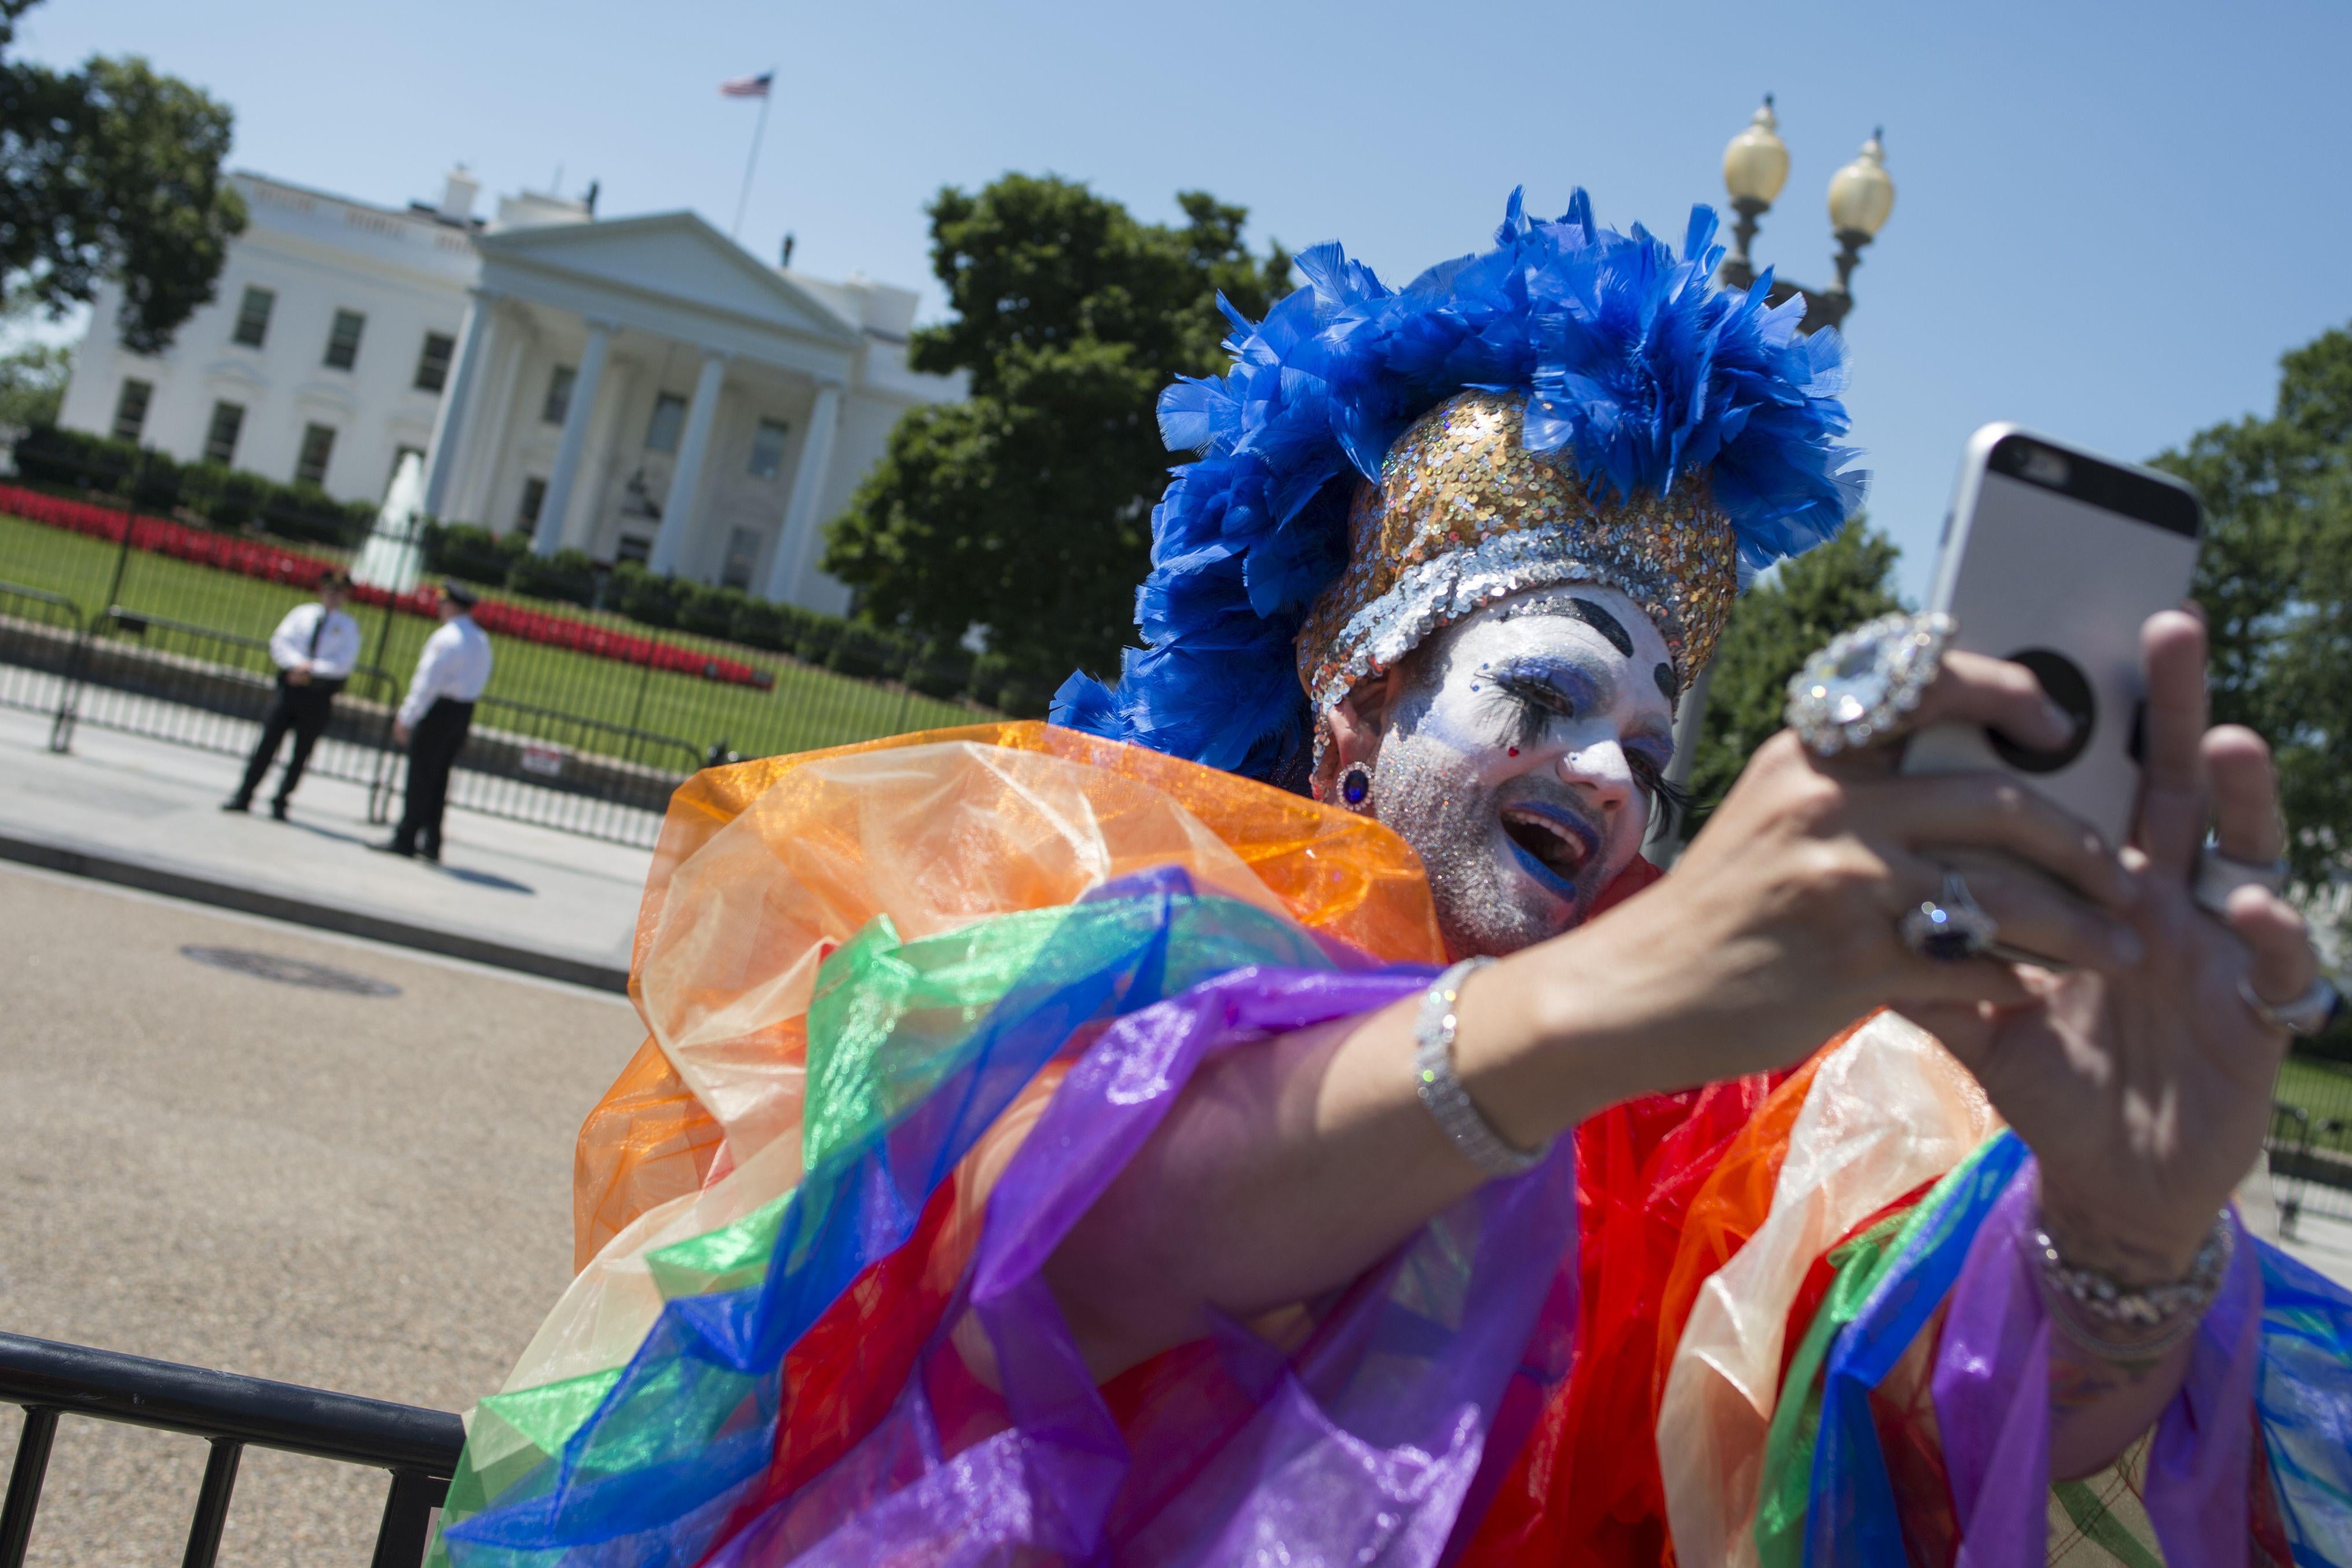 A Drag Queen takes a photo as LGBT members and their supporters walk past the White House during the Equality March for Unity & Pride parade in Washington DC, June 11, 2017. / AFP PHOTO / Andrew CABALLERO-REYNOLDS        (Photo credit should read ANDREW CABALLERO-REYNOLDS/AFP/Getty Images)